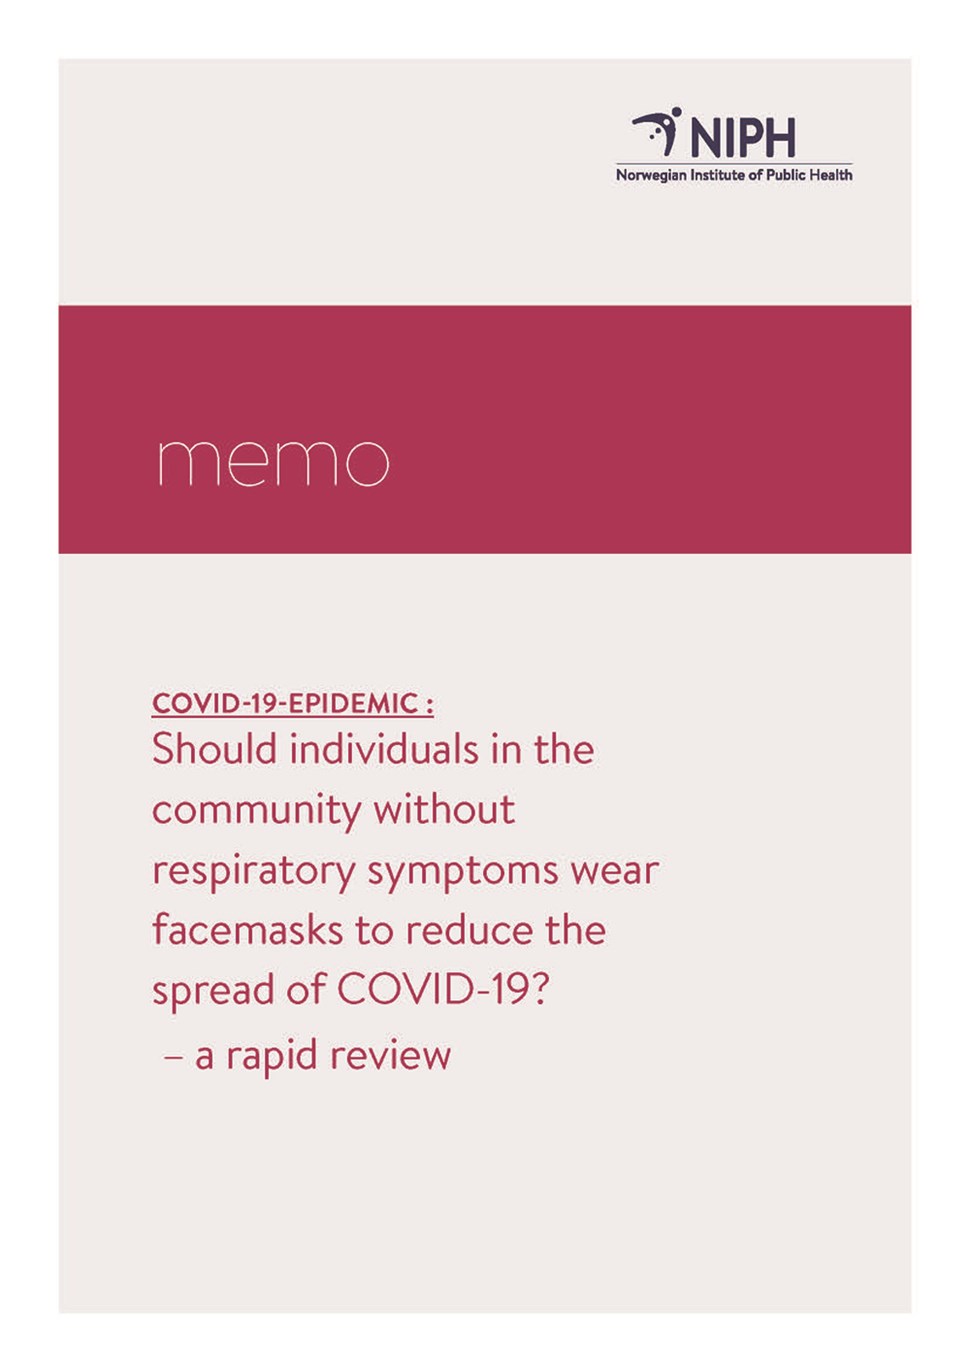 Should individuals in the community without respiratory symptoms wear facemasks to reduce the spread of COVID-19?